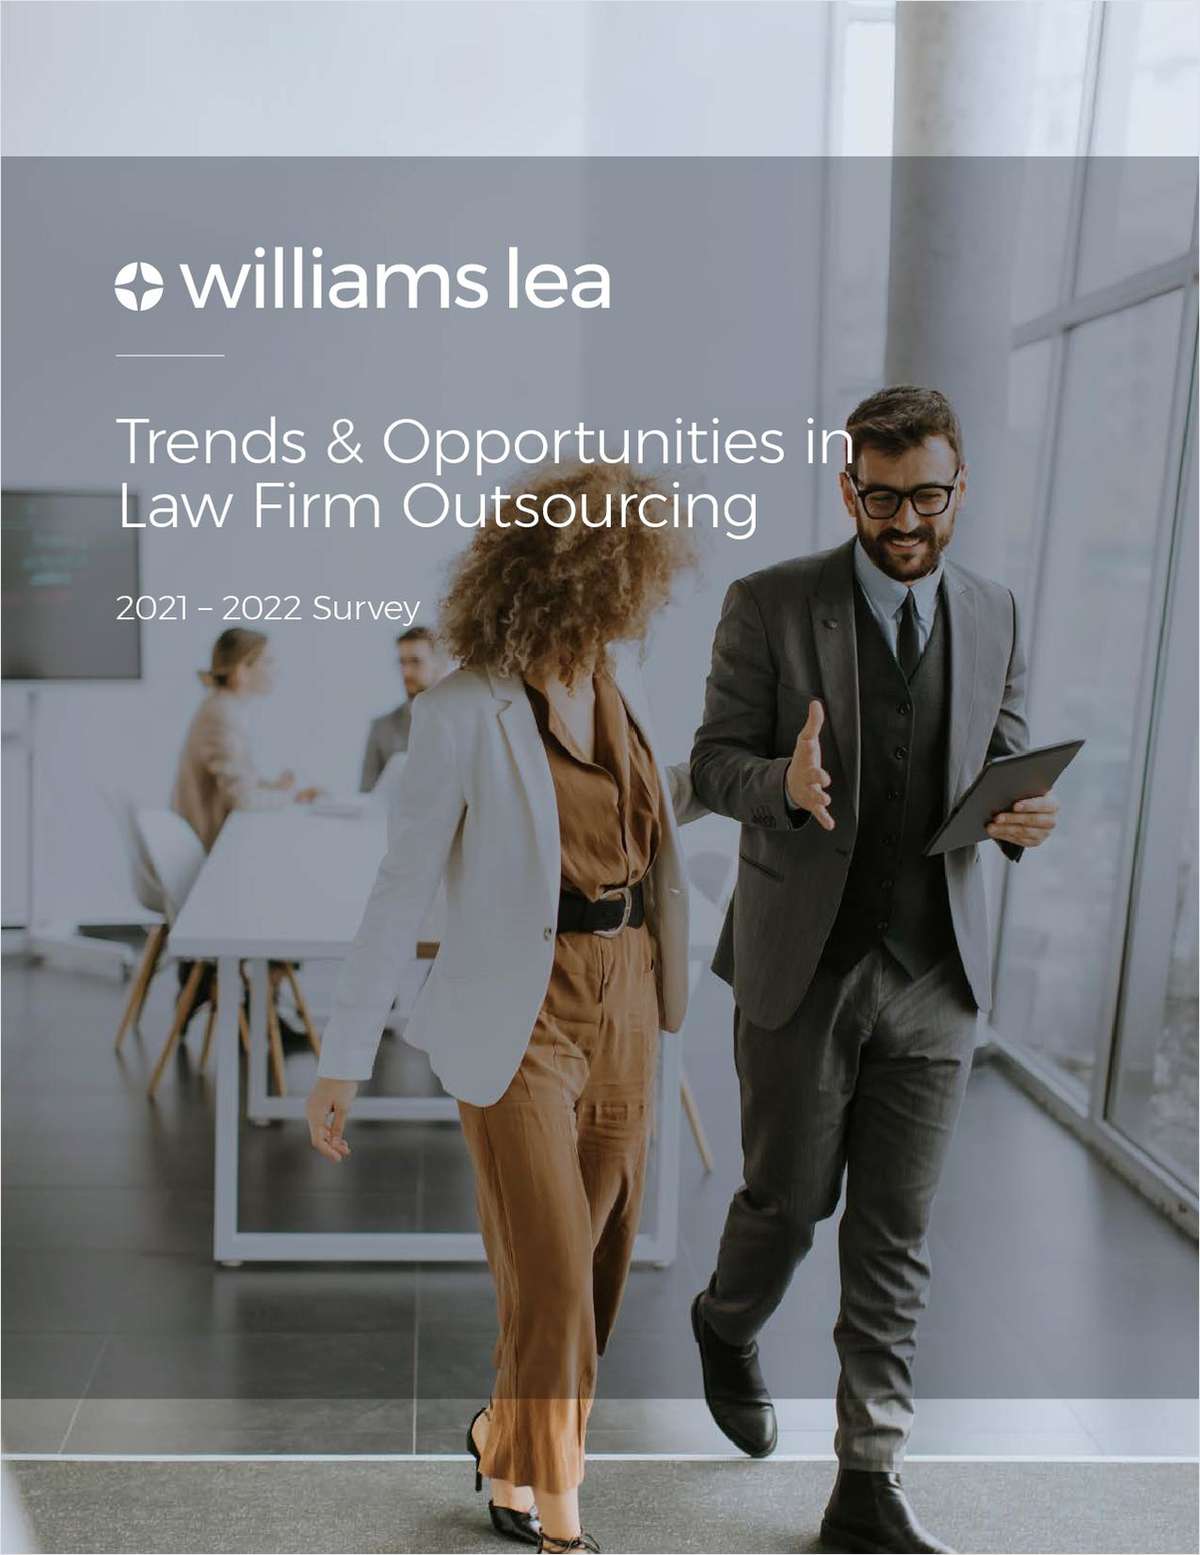 This 2021-2022 survey report provides proprietary insights into how law firms are making investments and where they are decreasing expenditures for the year ahead. You will gain a greater understanding of the types of pressures--from client demands to economic volatility--that are driving firms’ behavior.